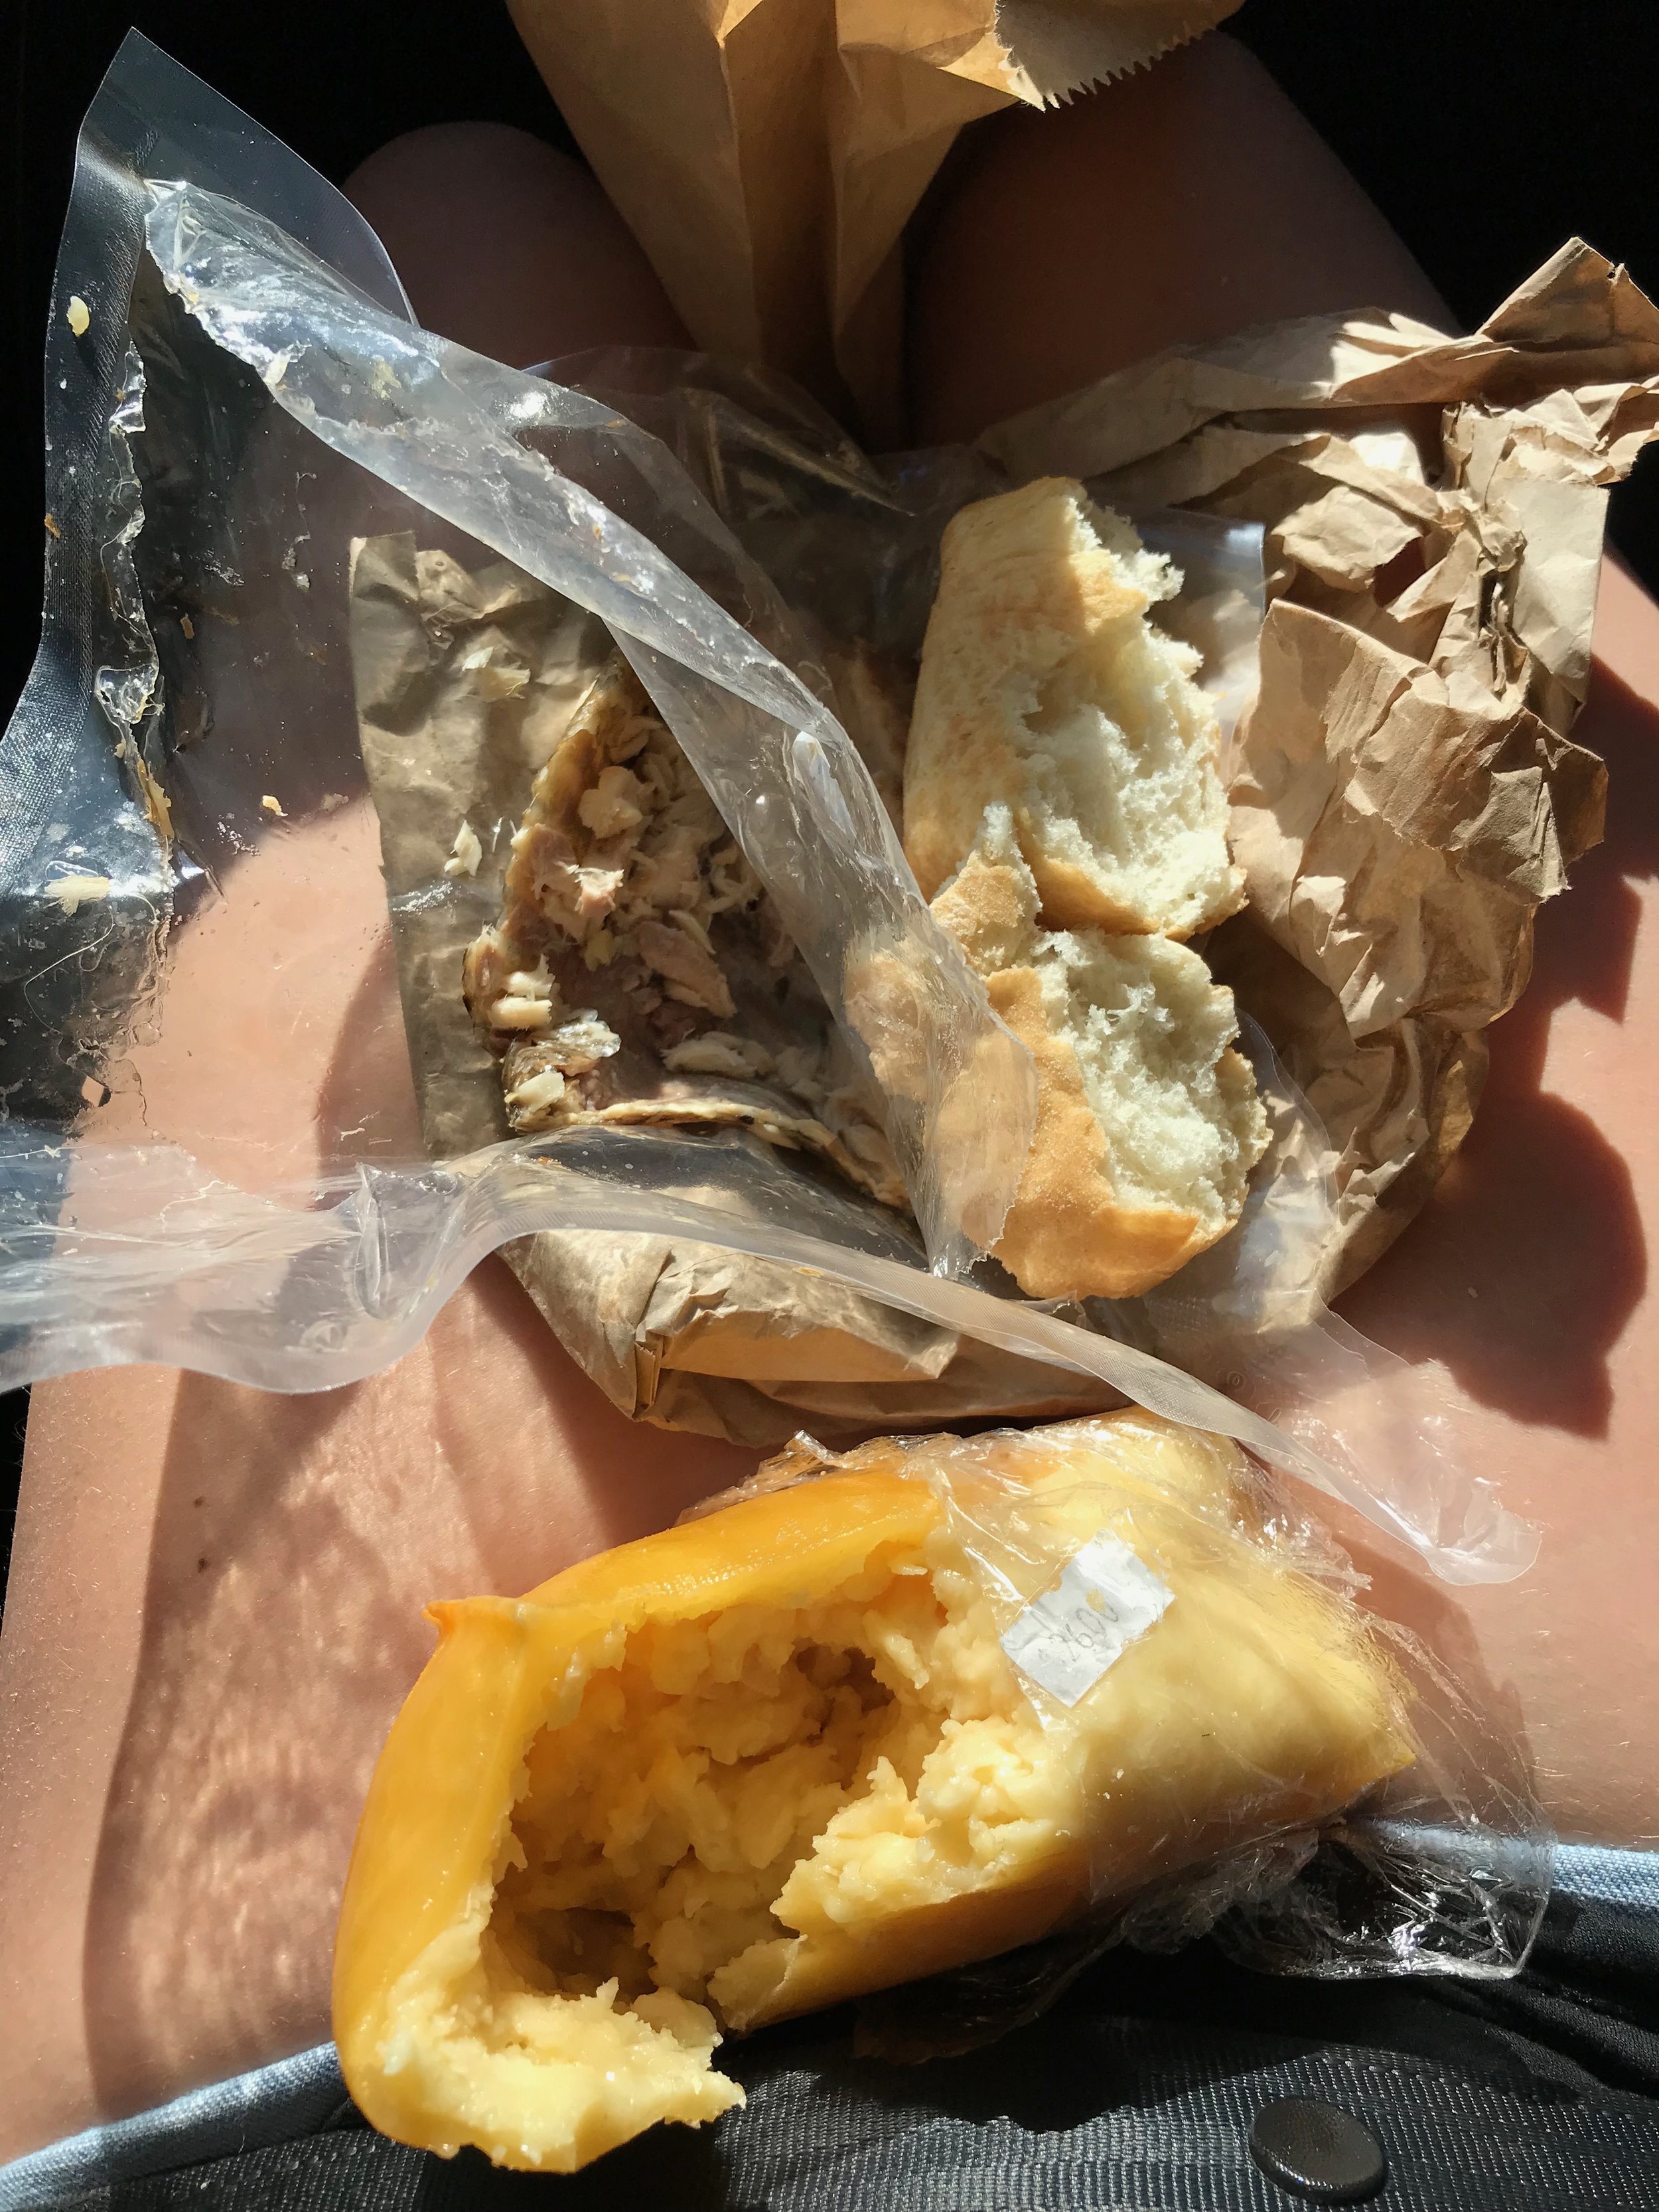 Cheese, Fresh Bread, and Salmon in Chile